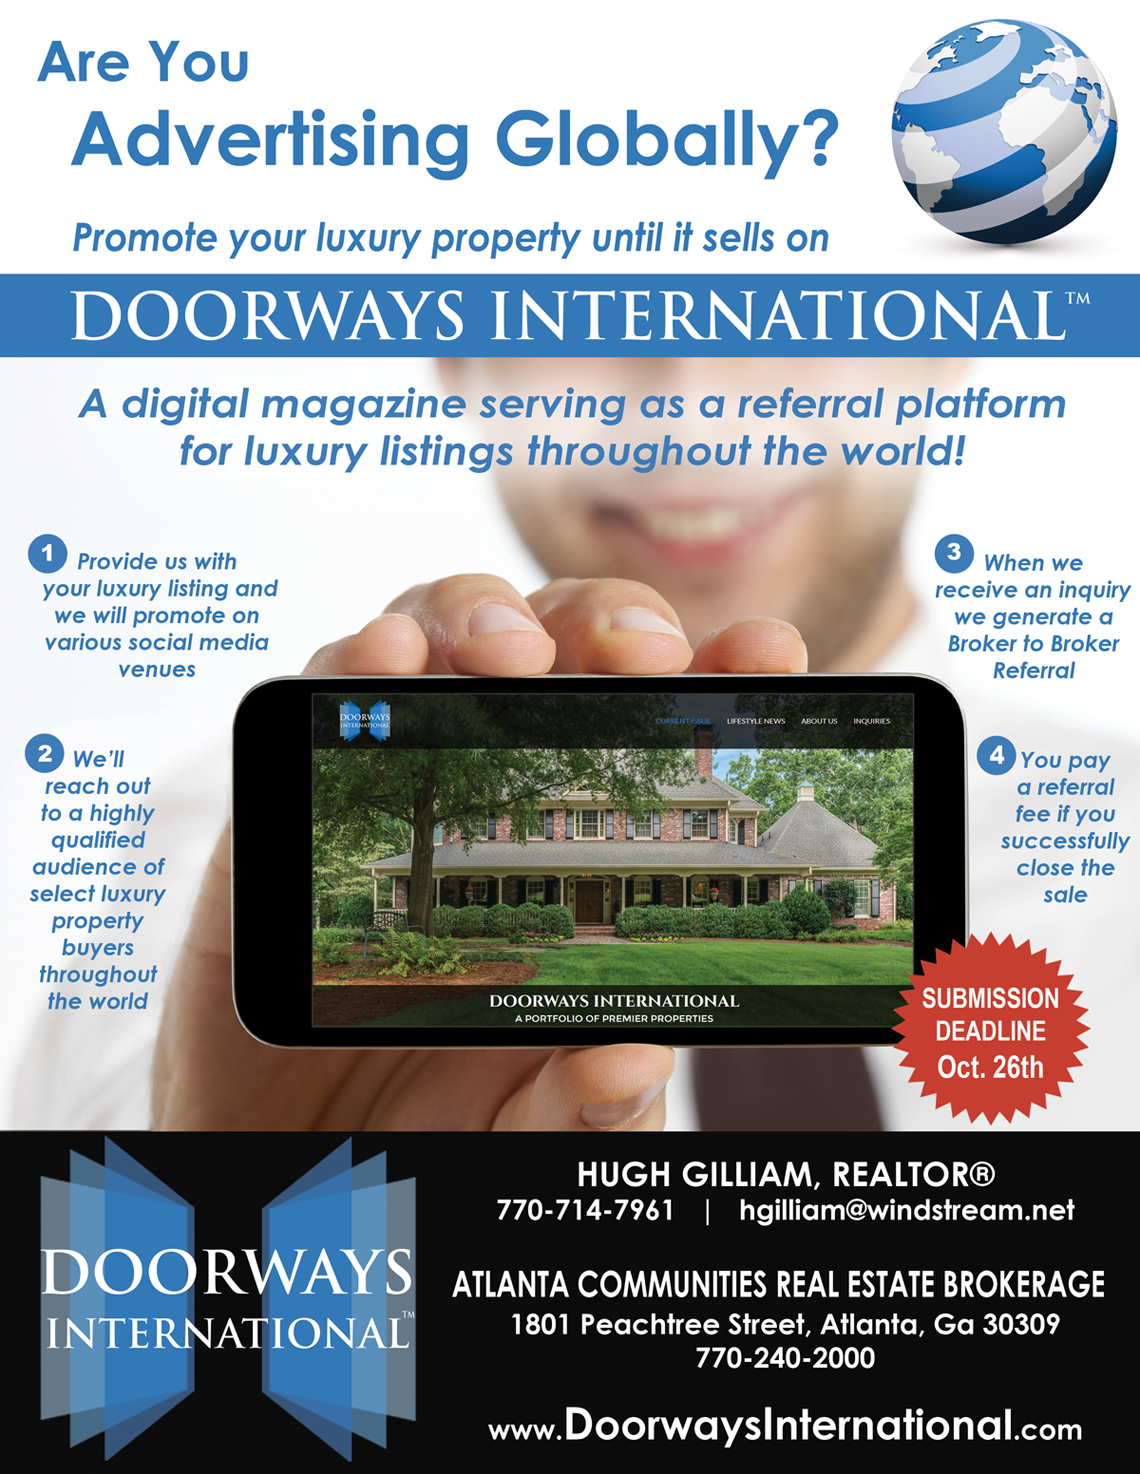 Doorways International - details for agents to have listings included